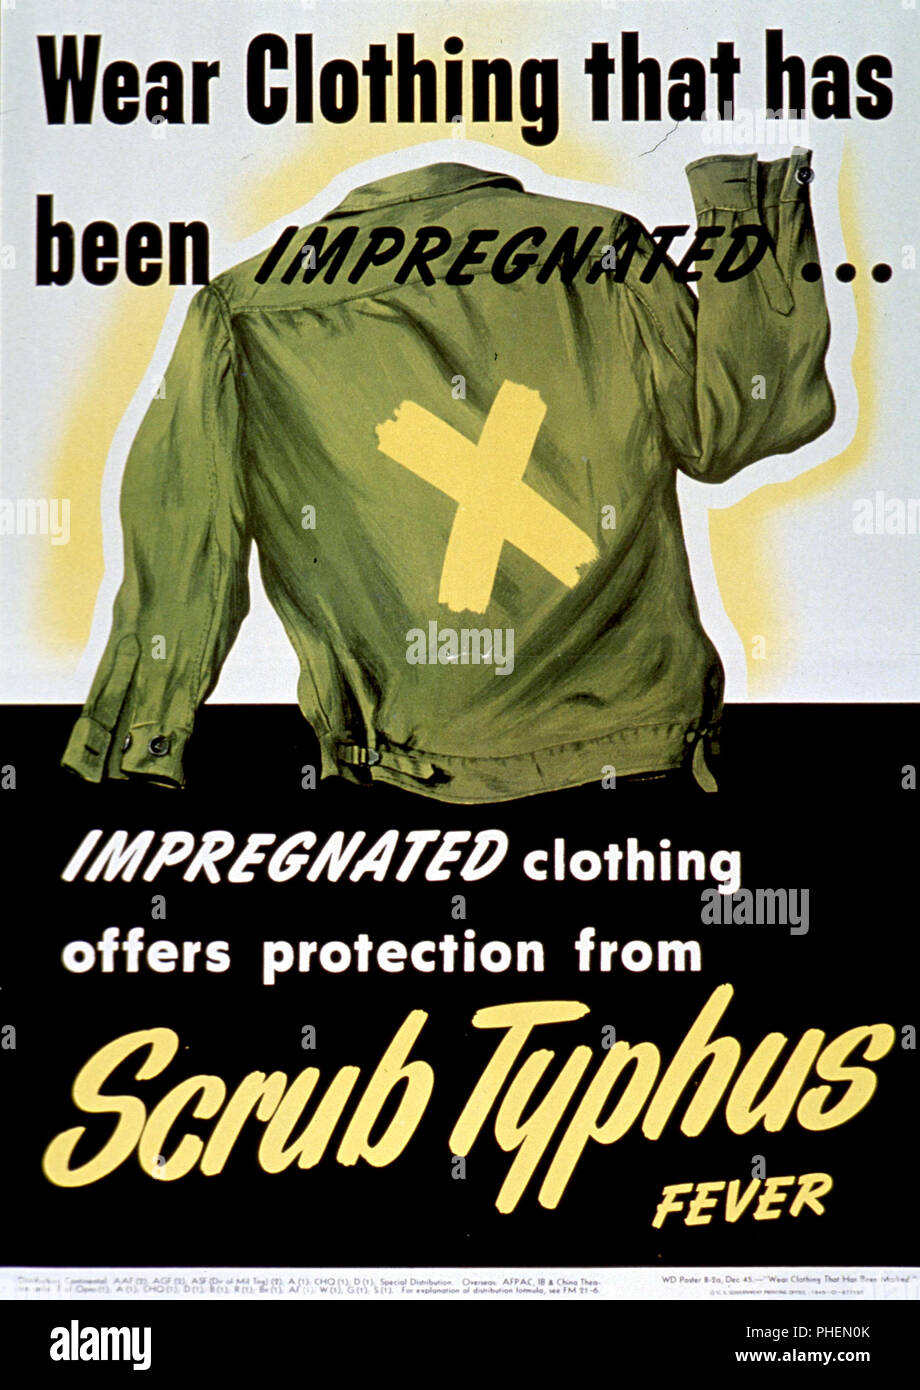 Wear clothing that has been impregnated-- impregnated clothing offers protection from scrub typhus fever ca. 1945 Stock Photo